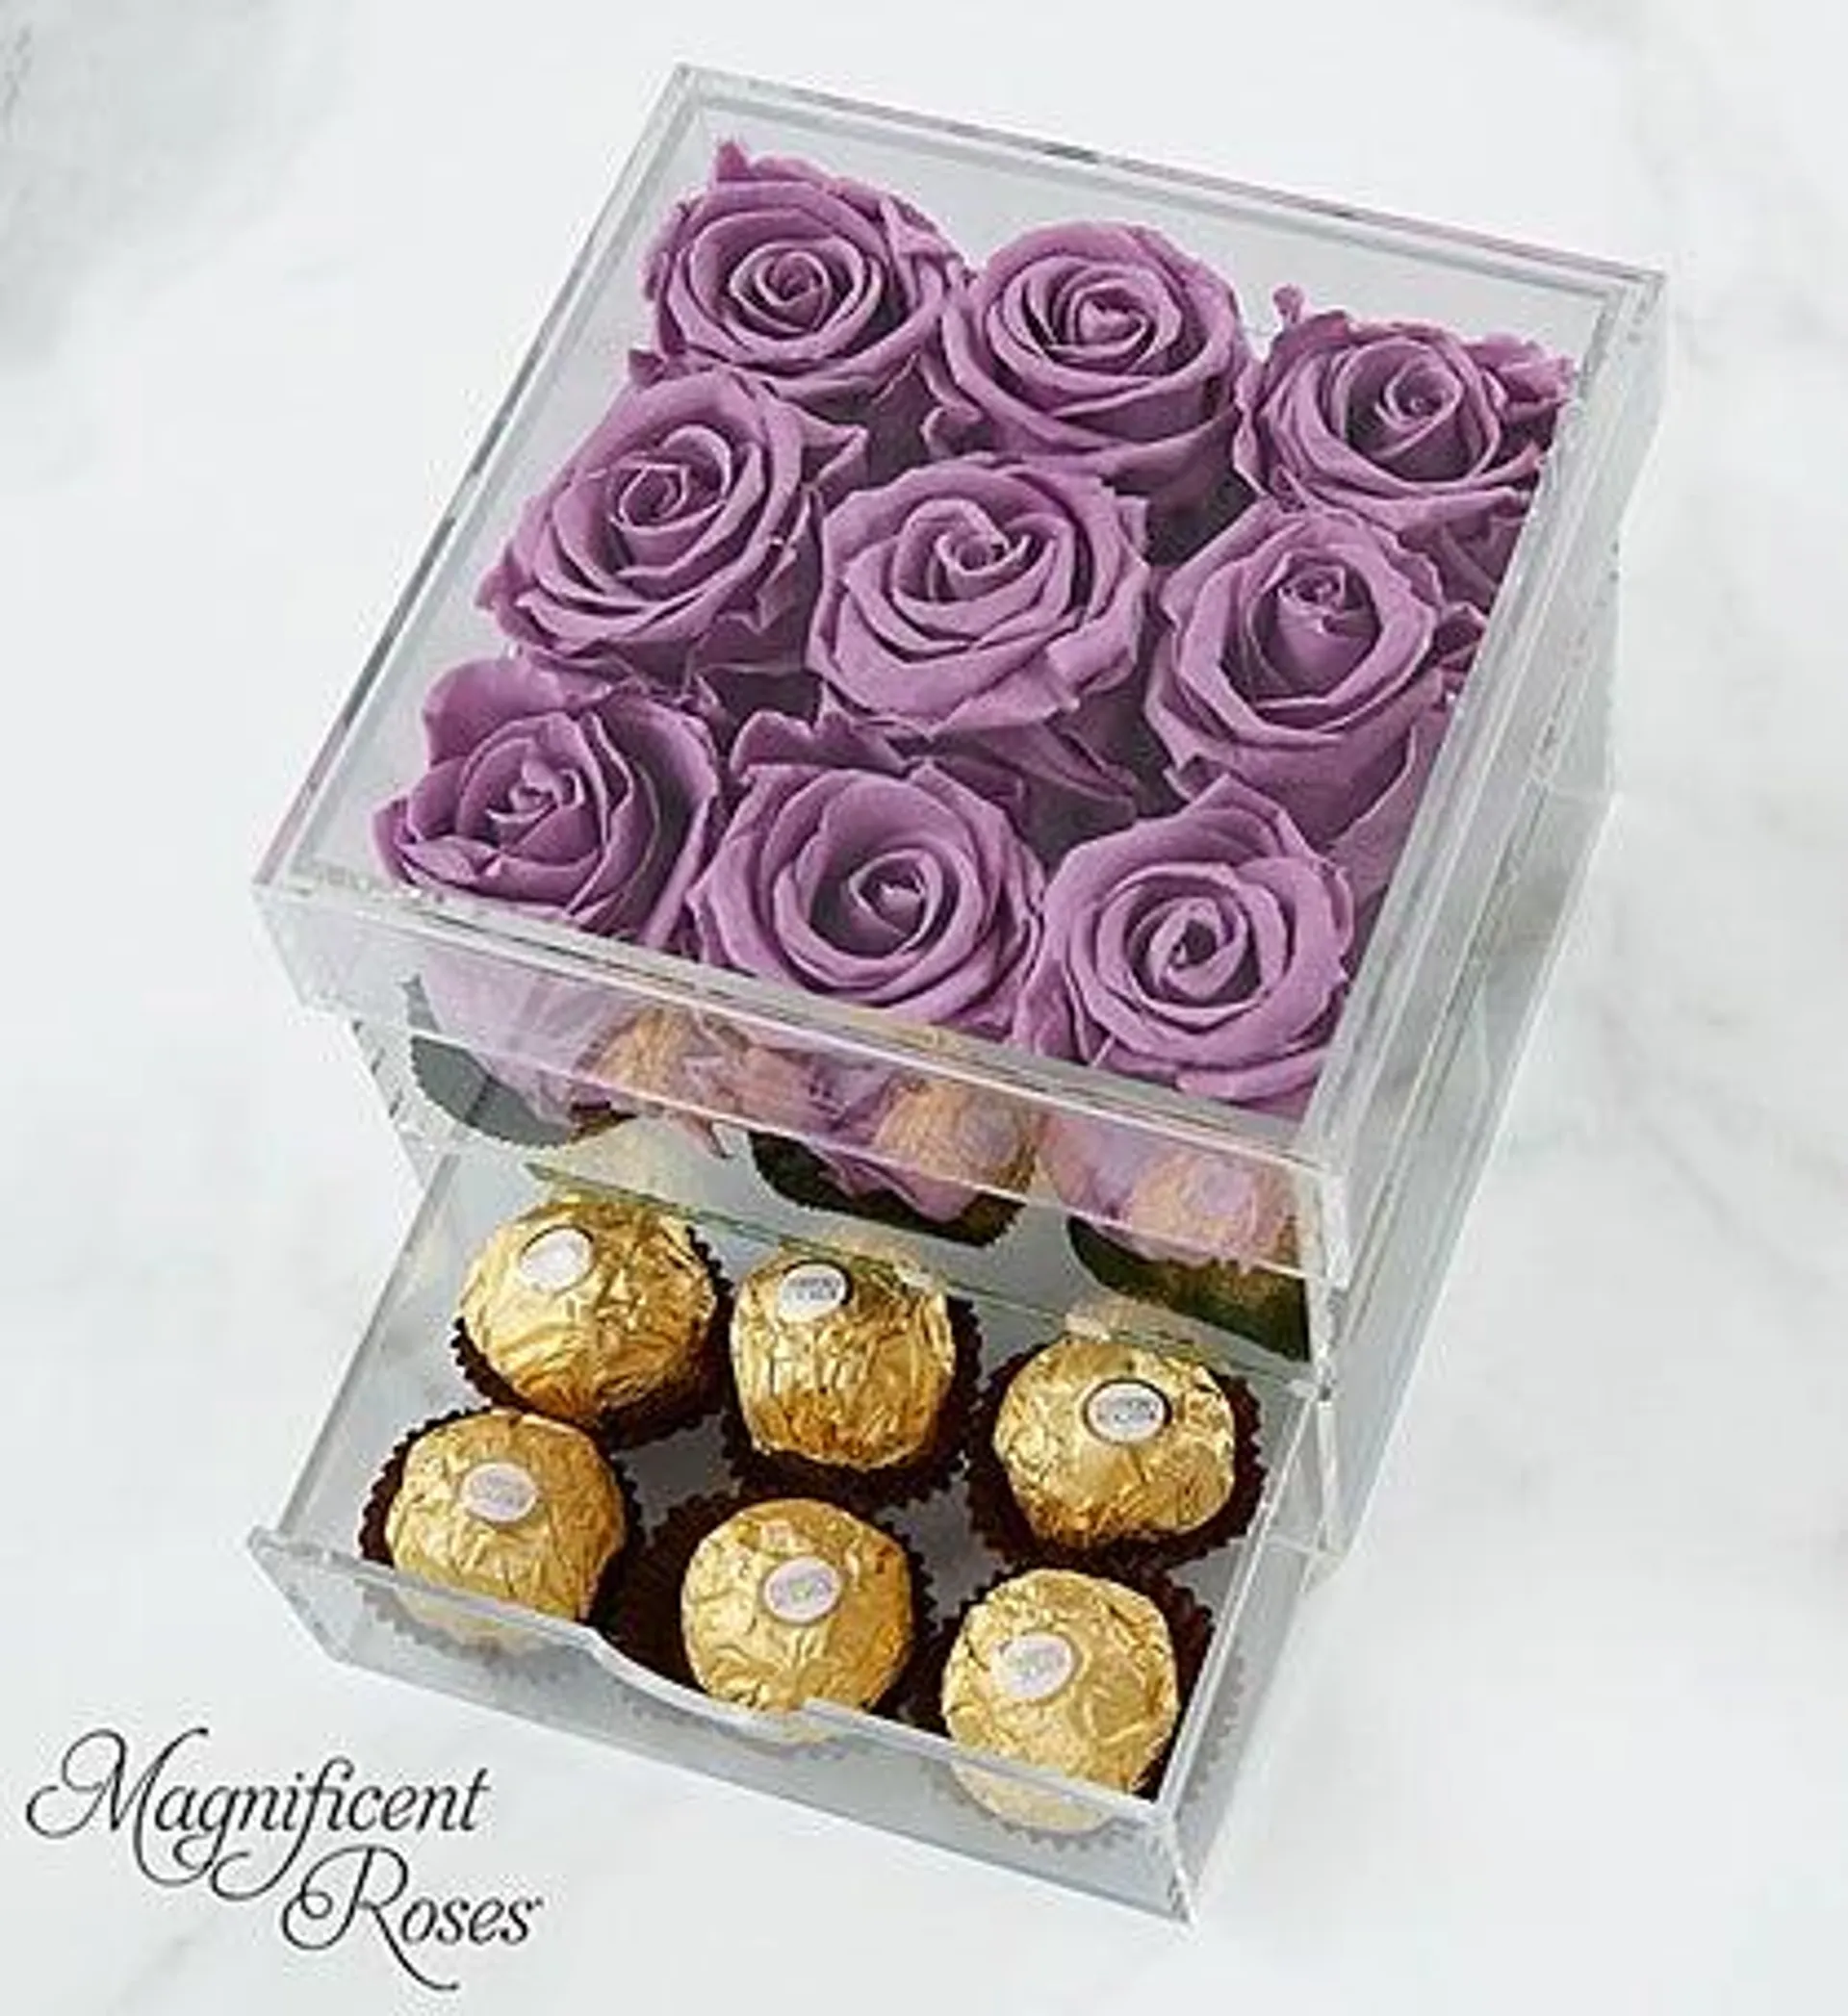 Magnificent Roses ® Preserved with Ferrero Rocher ®